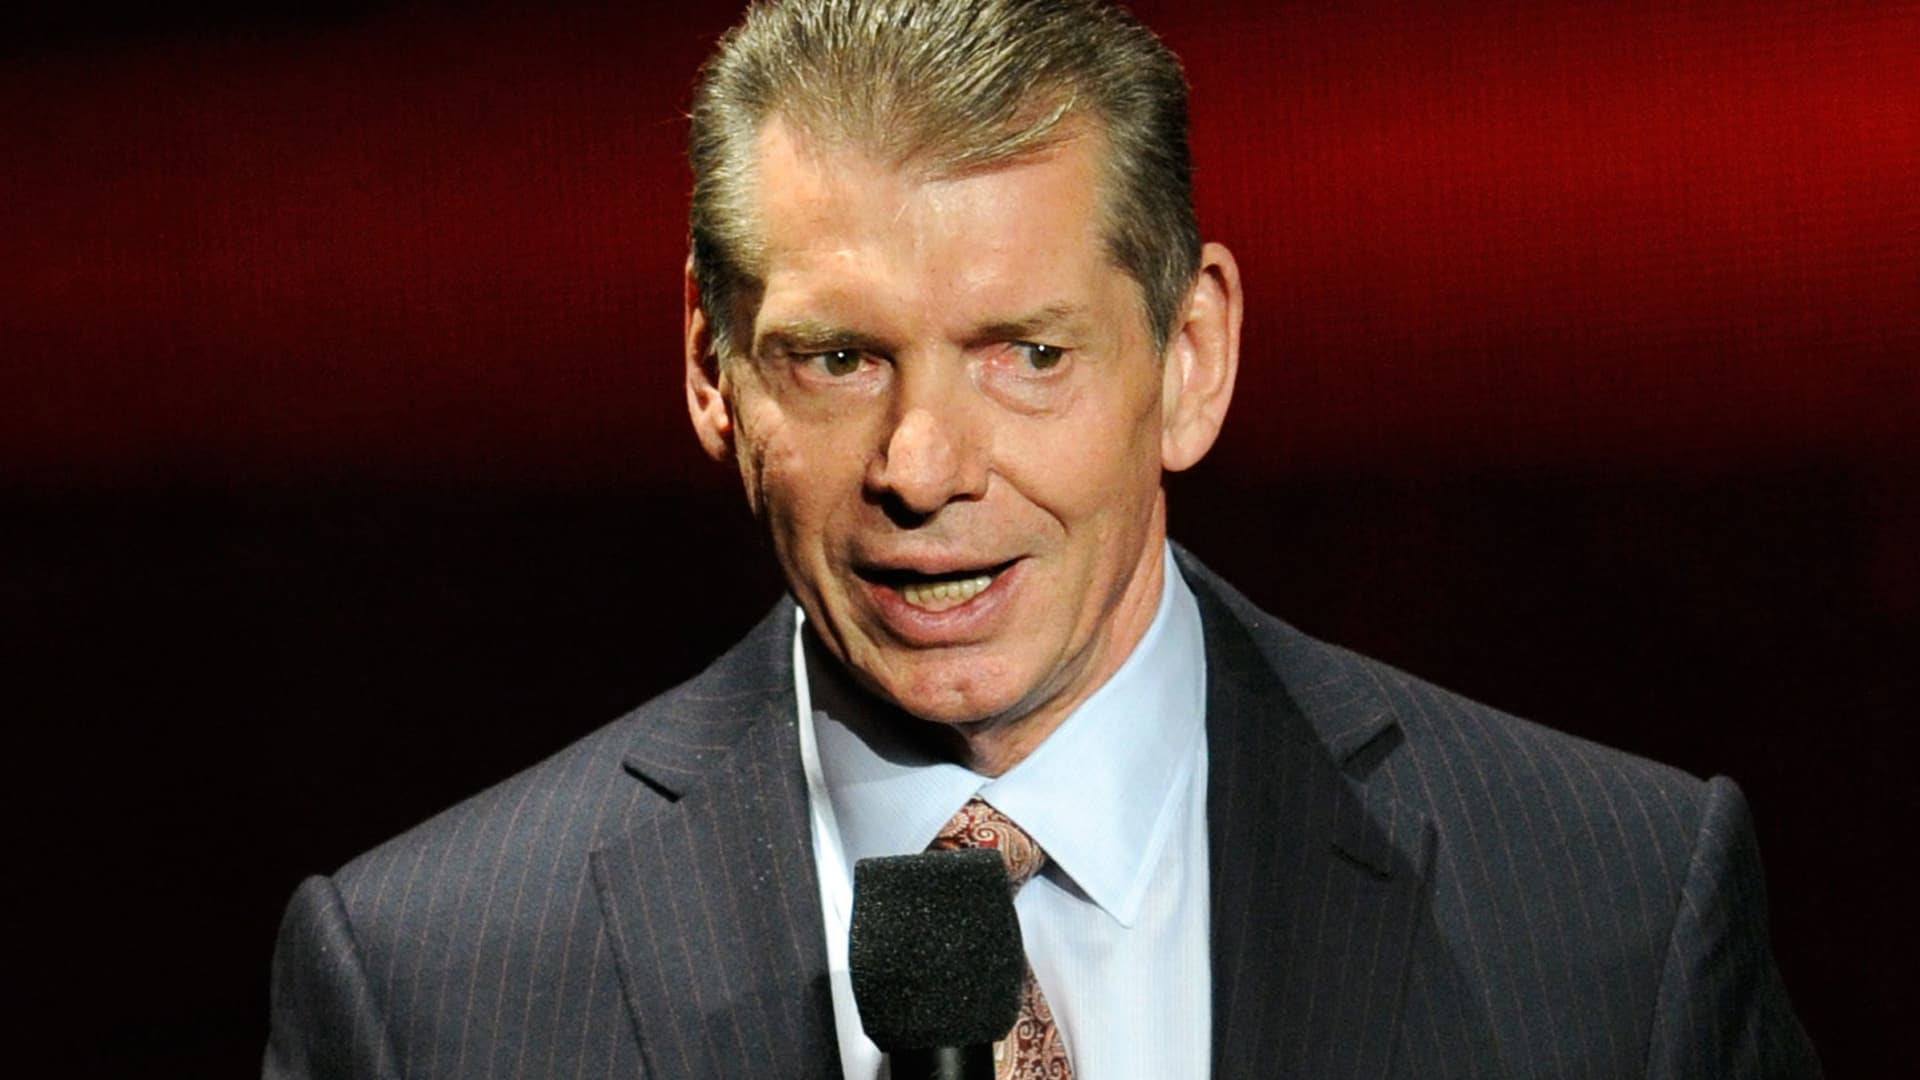 WWE boss Vince McMahon steps away from CEO role, will address misconduct probe on 'Smackdown'